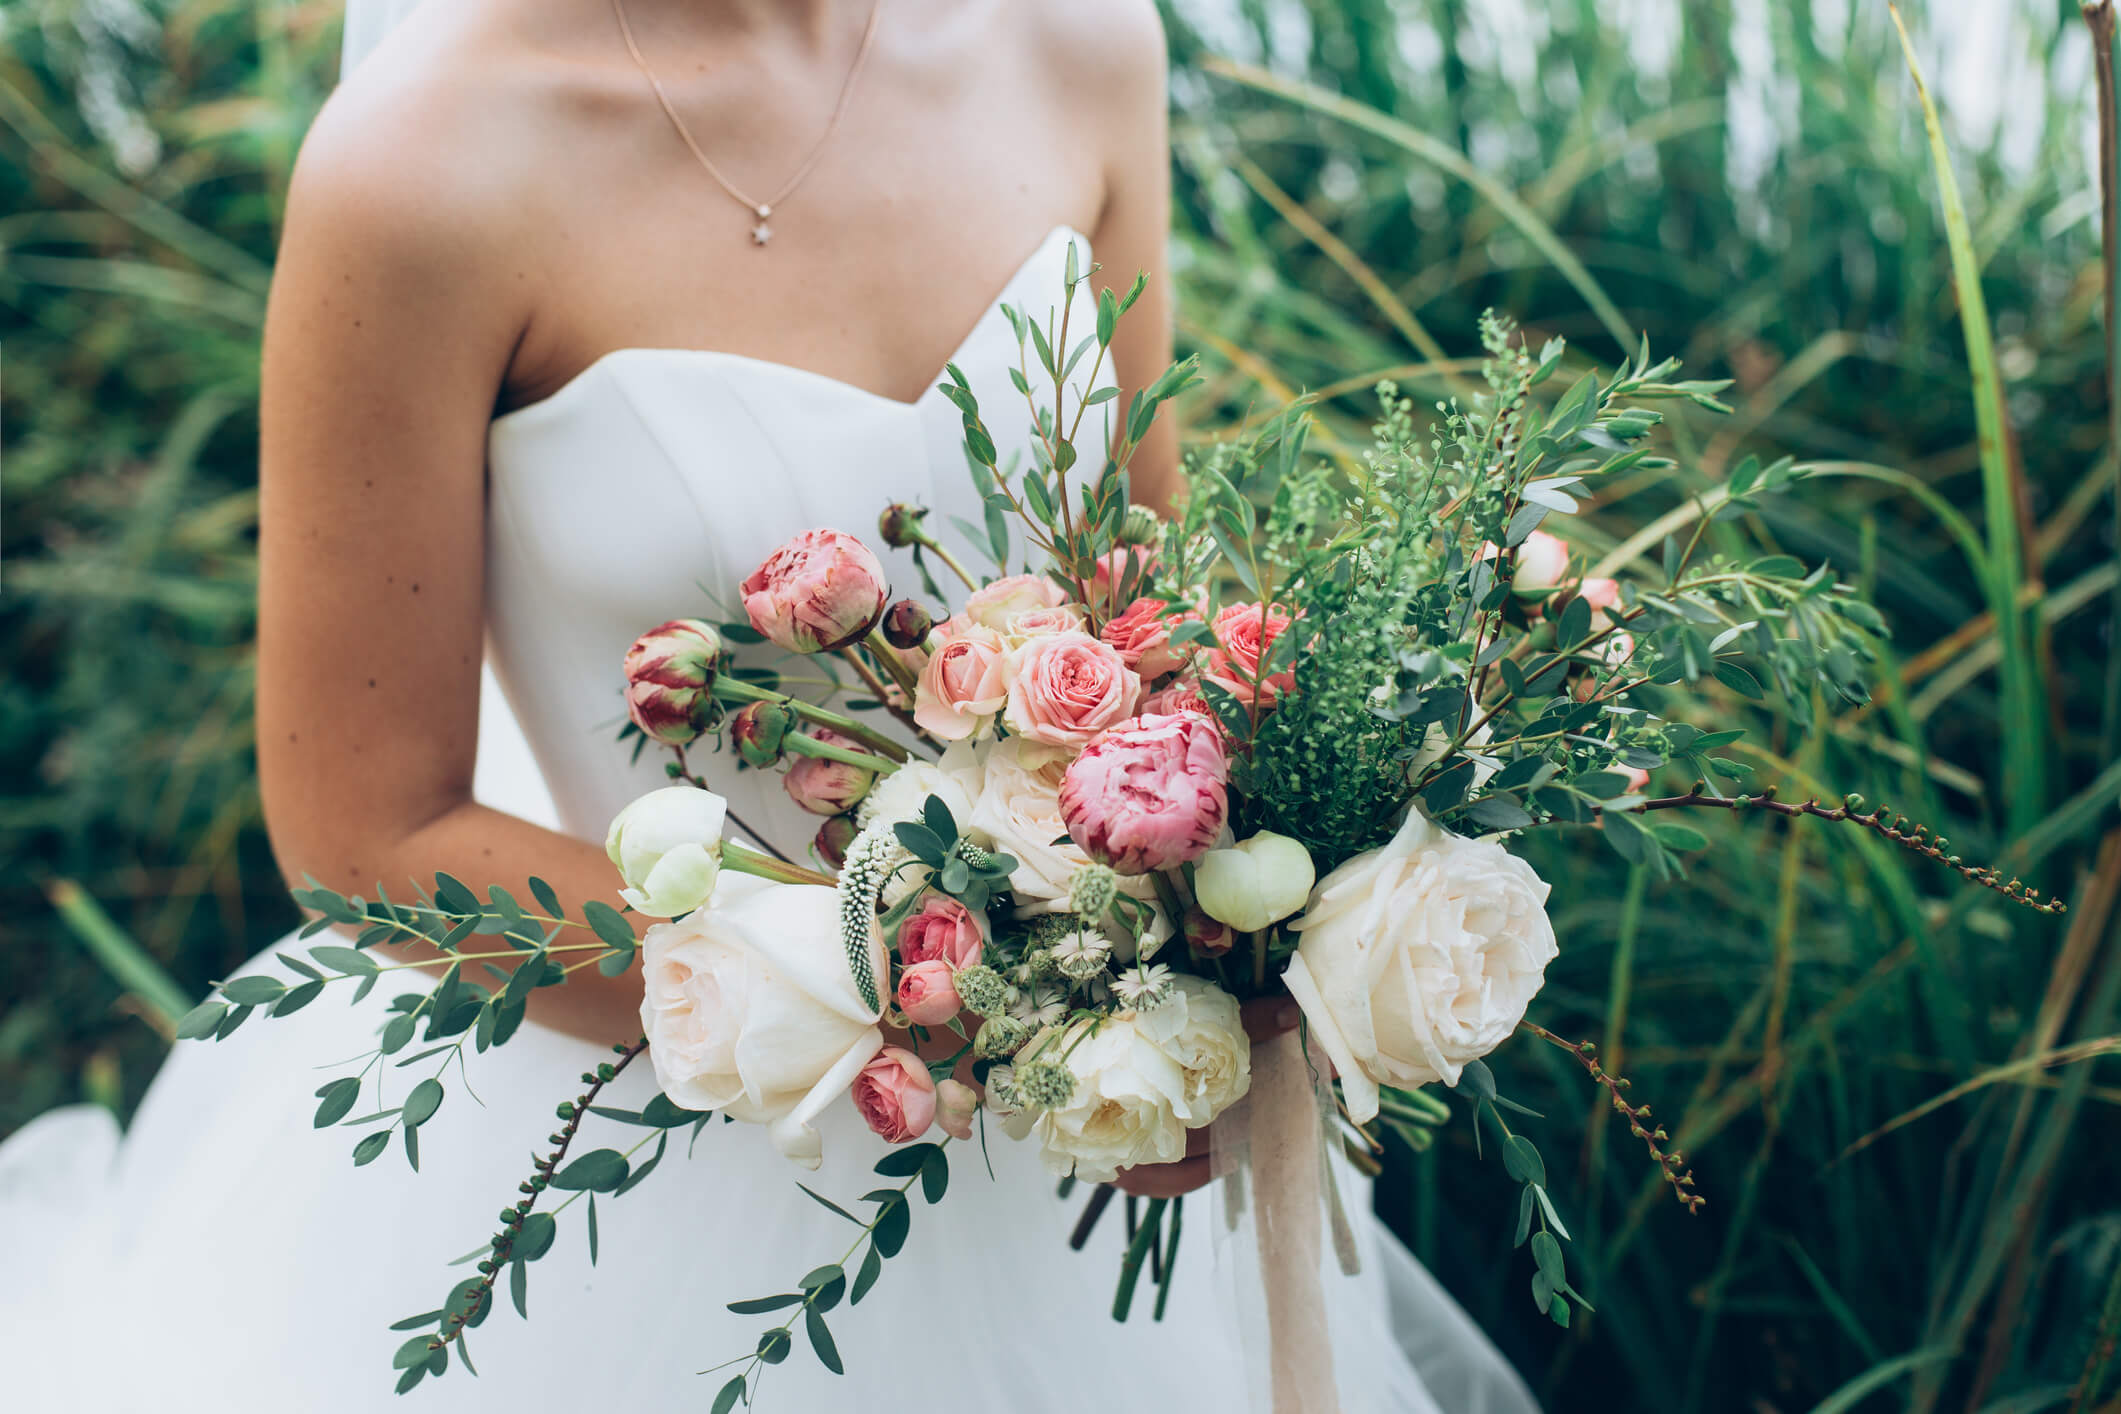 A fairytale wedding with spring wedding colors to brighten up your day!